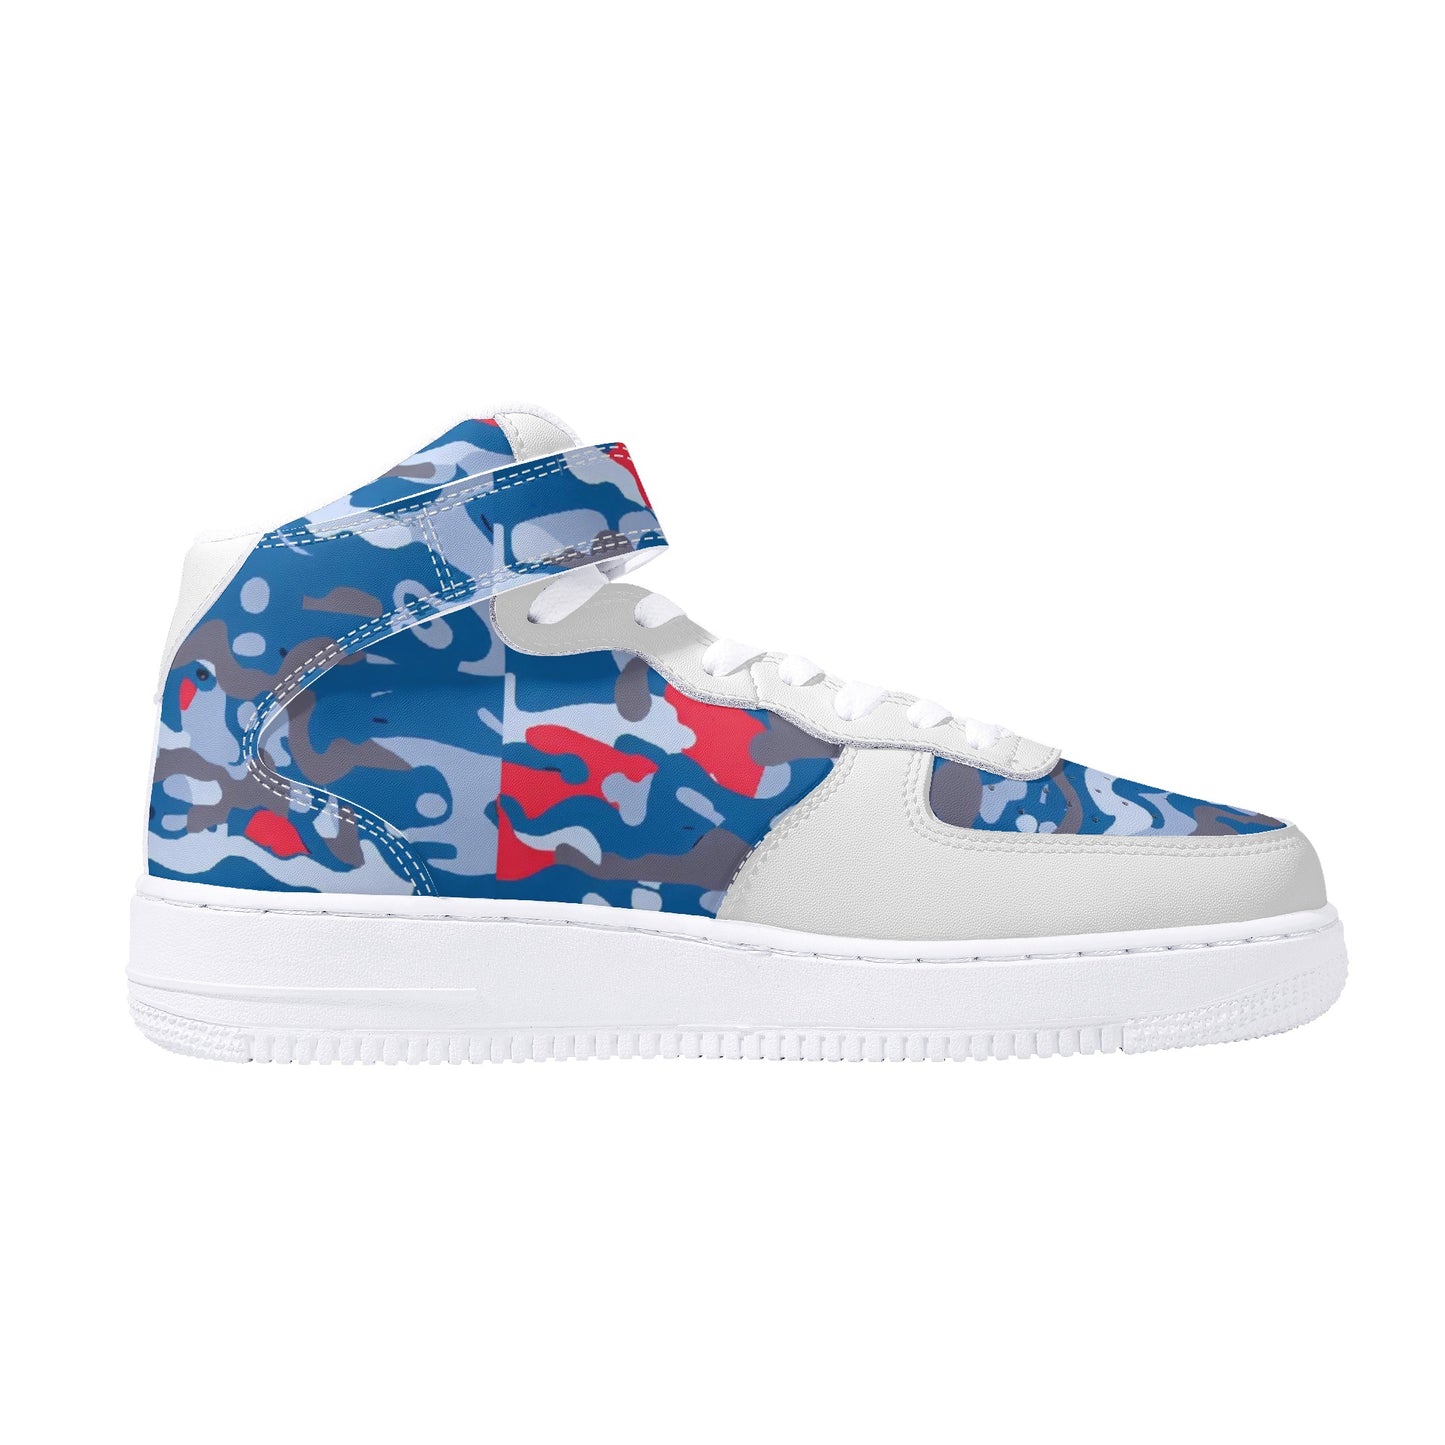 The B.E. Style Brand High Top Team Sneakers_Blue for Him